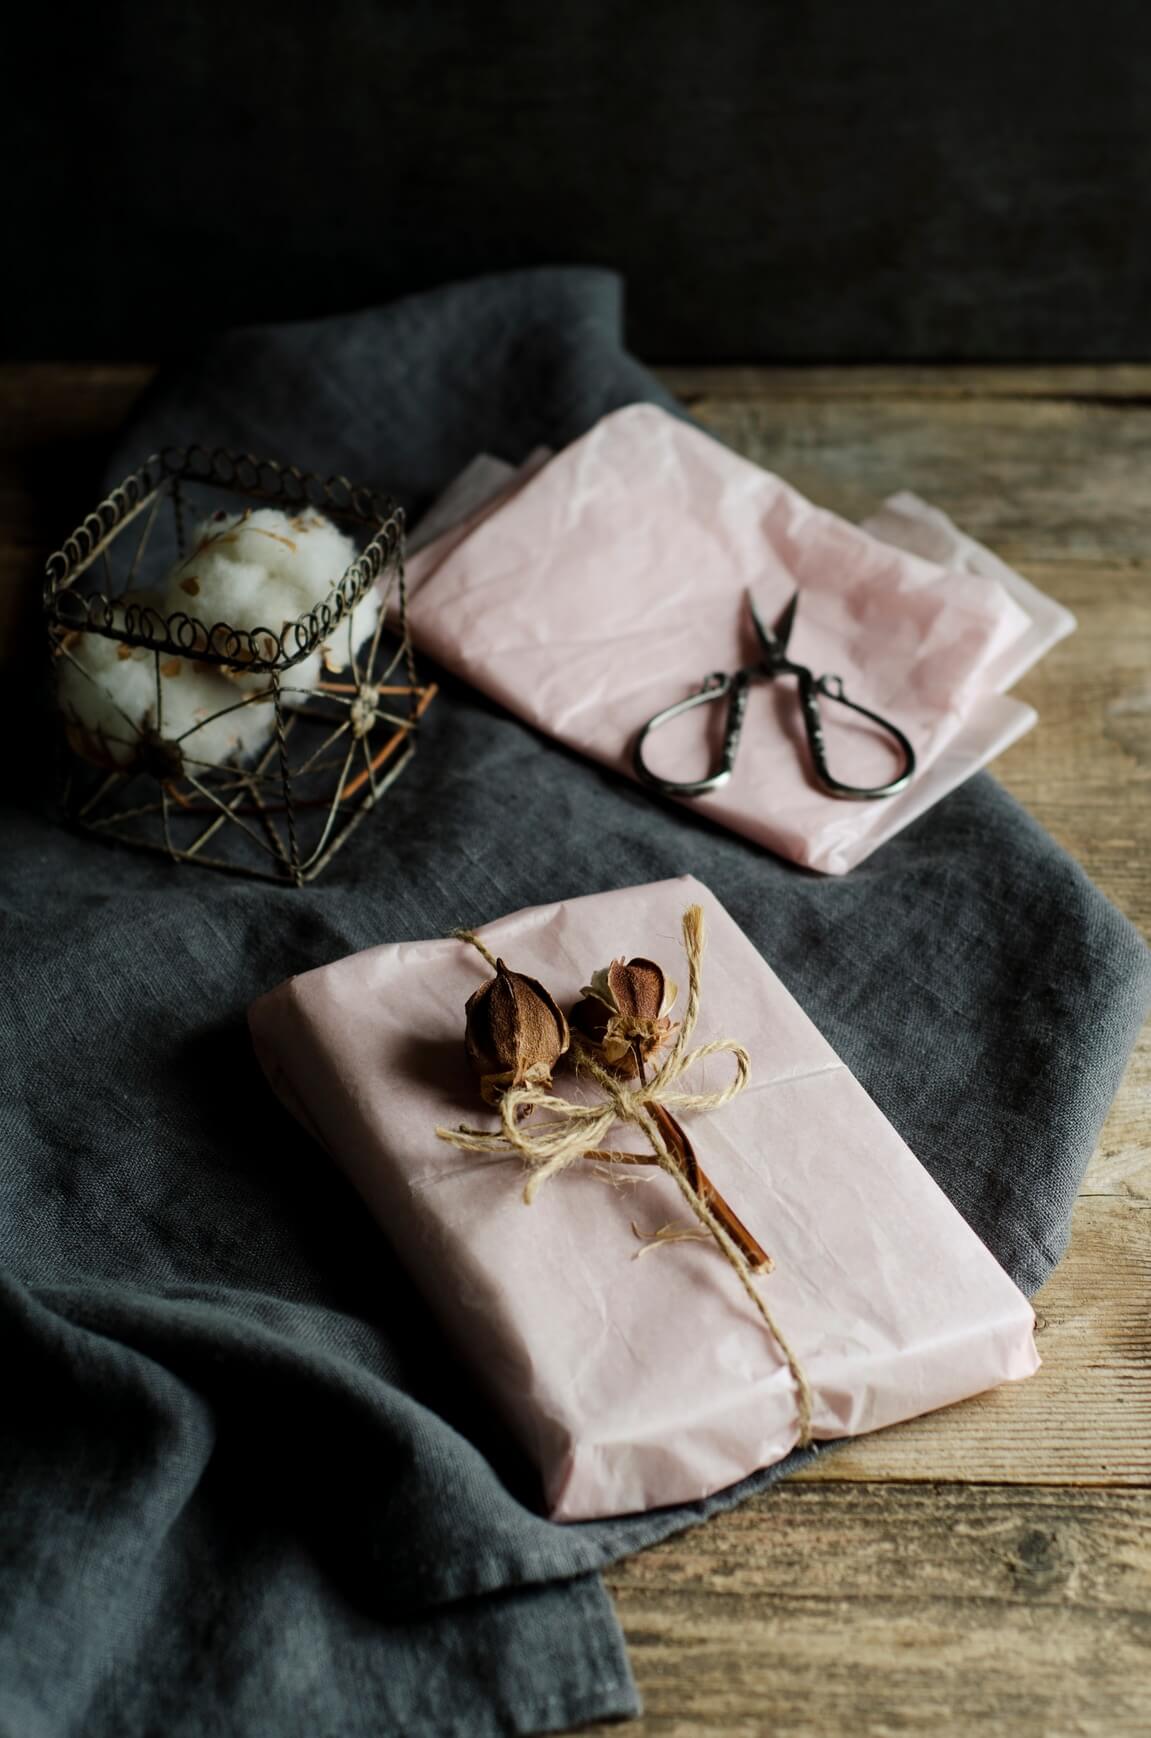 Gifts bought and wrapped with intention, wrapped with a natural paper and dried flower bouquet; caught just after finishing up, the image suggests intention in the holiday season